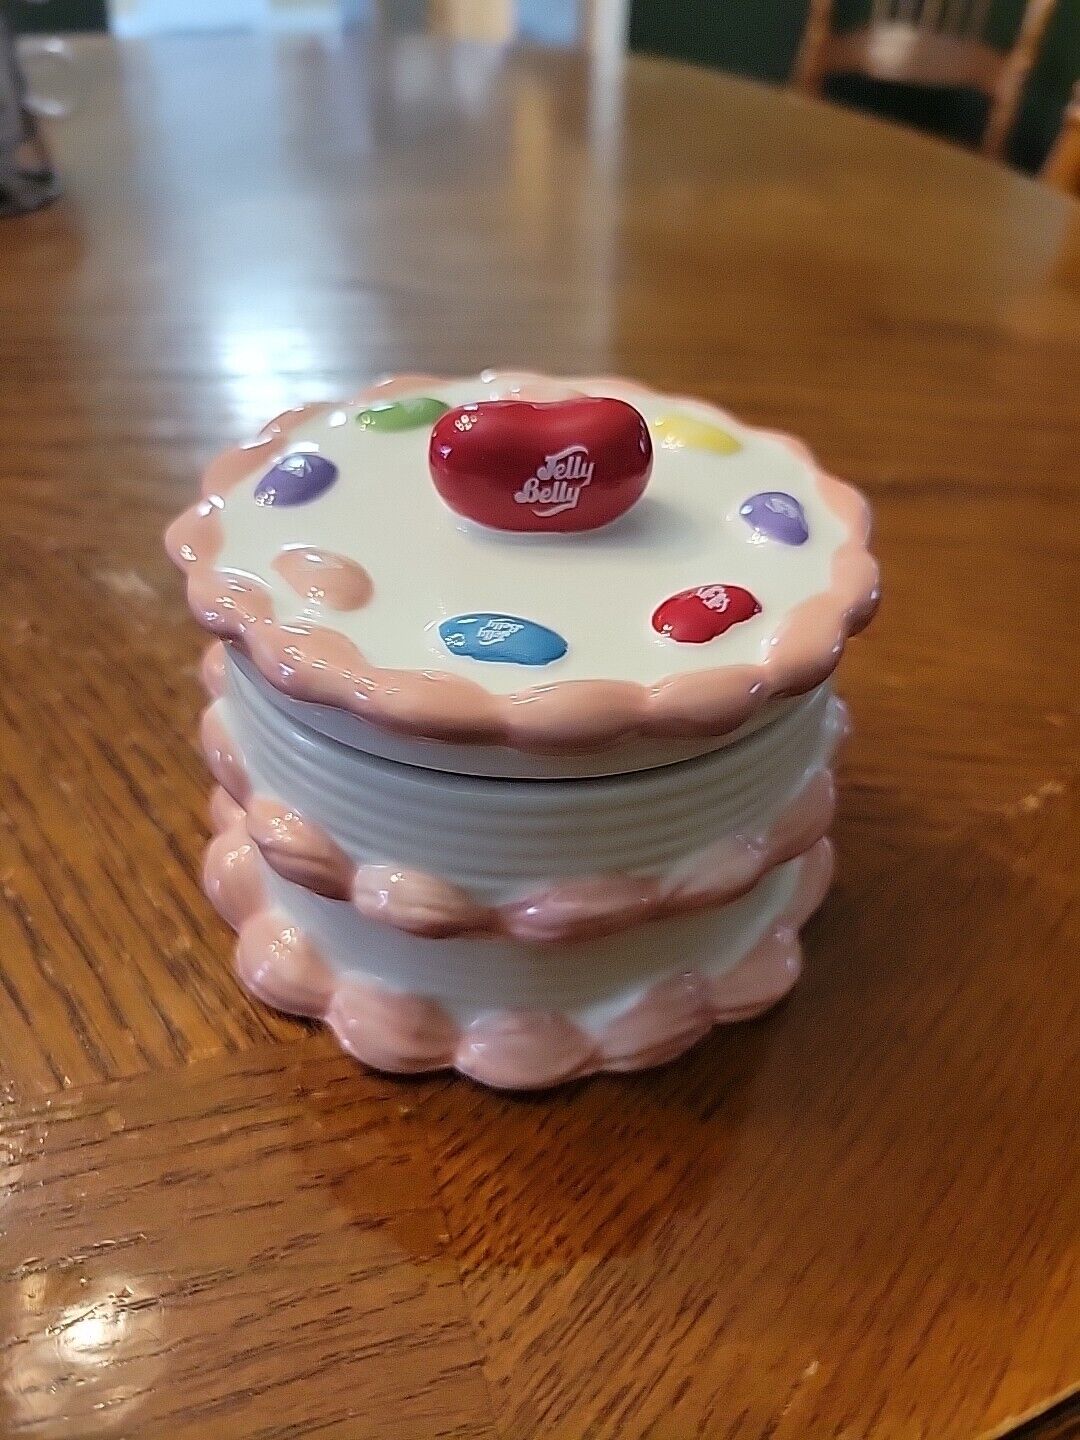 Jelly Belly Ceramic Birthday Cake Jelly Bean Pink Candy or Trinket Box